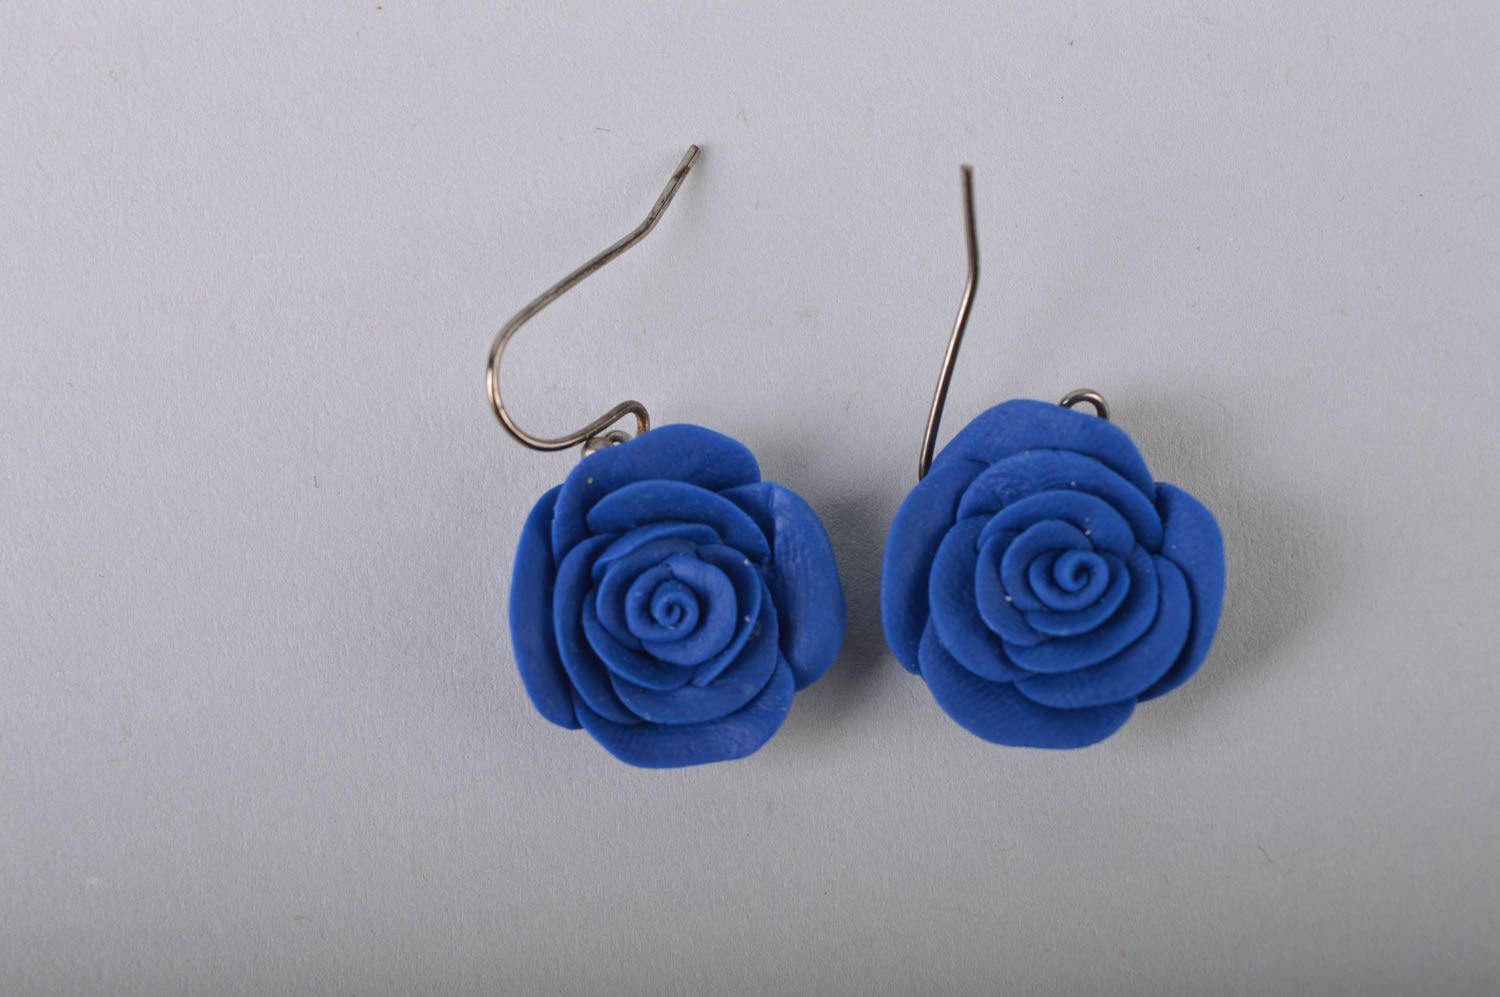 Handmade beautiful moulded earrings made of cold porcelain in shape of roses photo 2